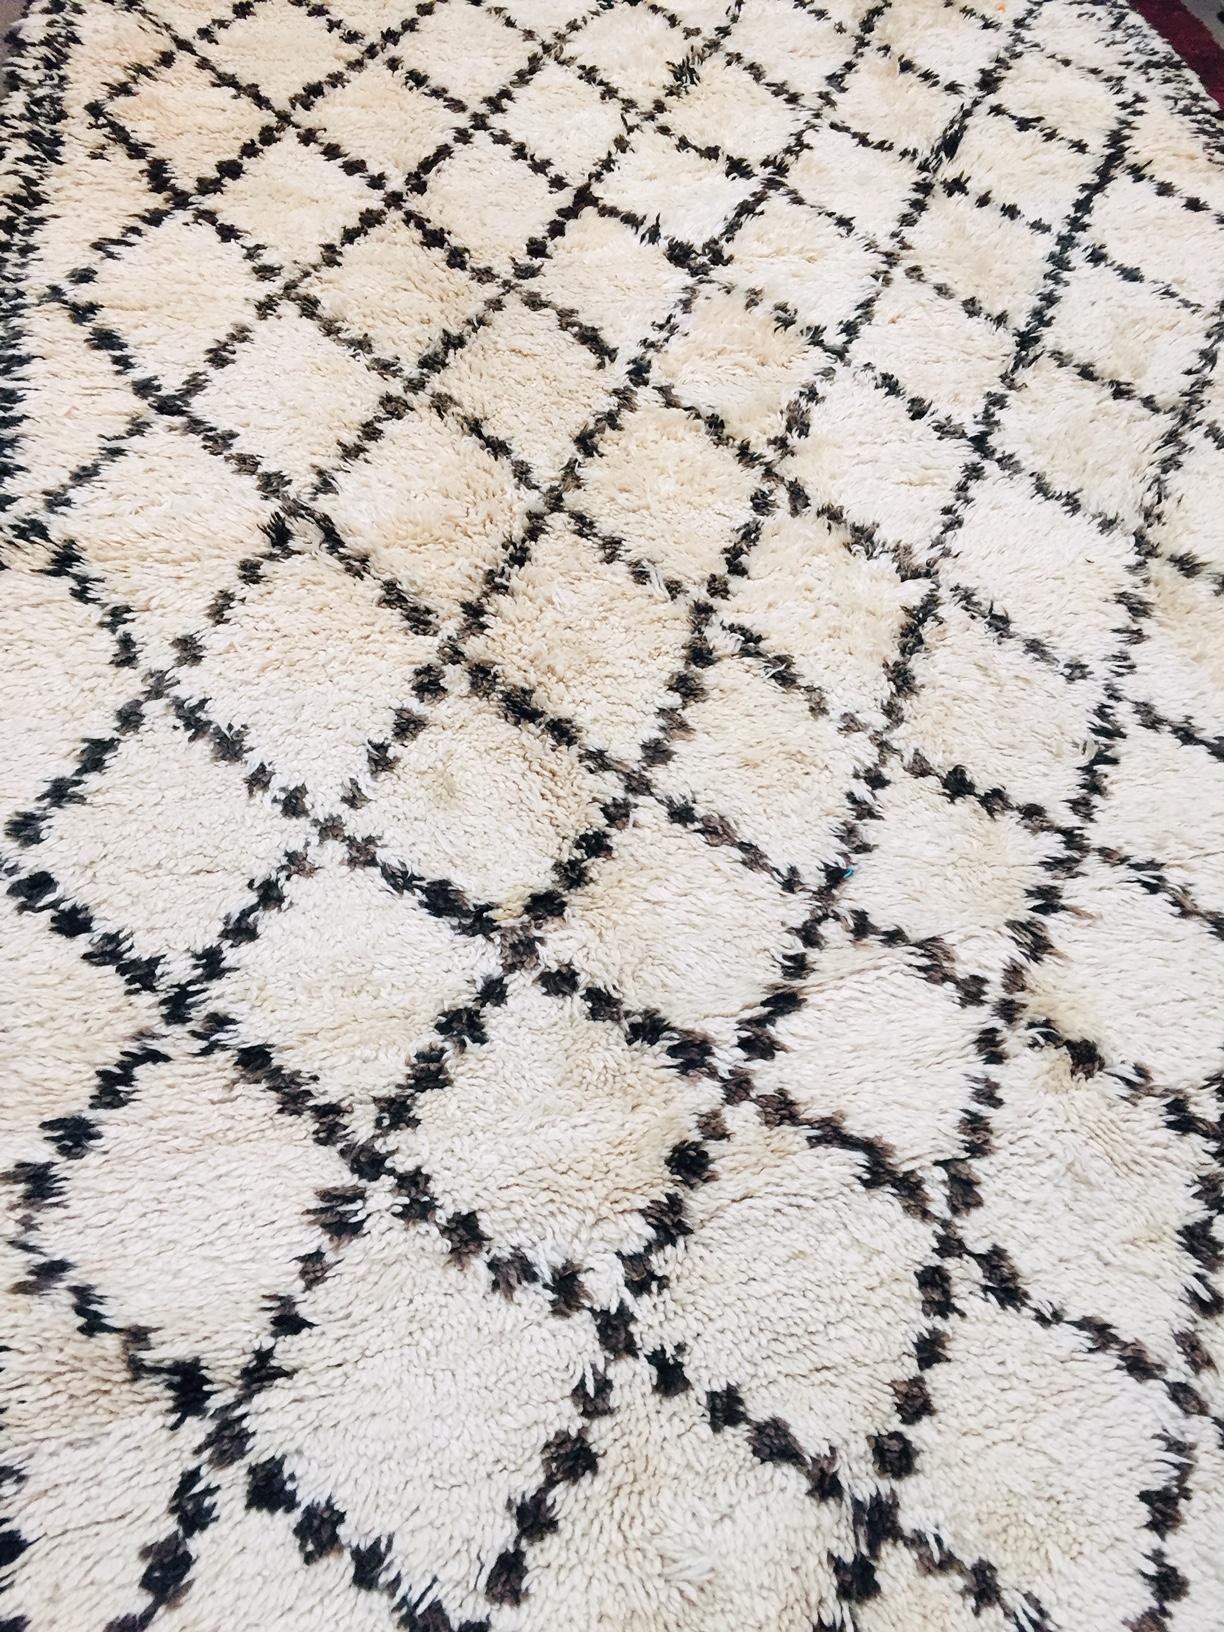 1950s Moroccan Vintage White and Black Beni Ouarain Tribal African Rug For Sale 1